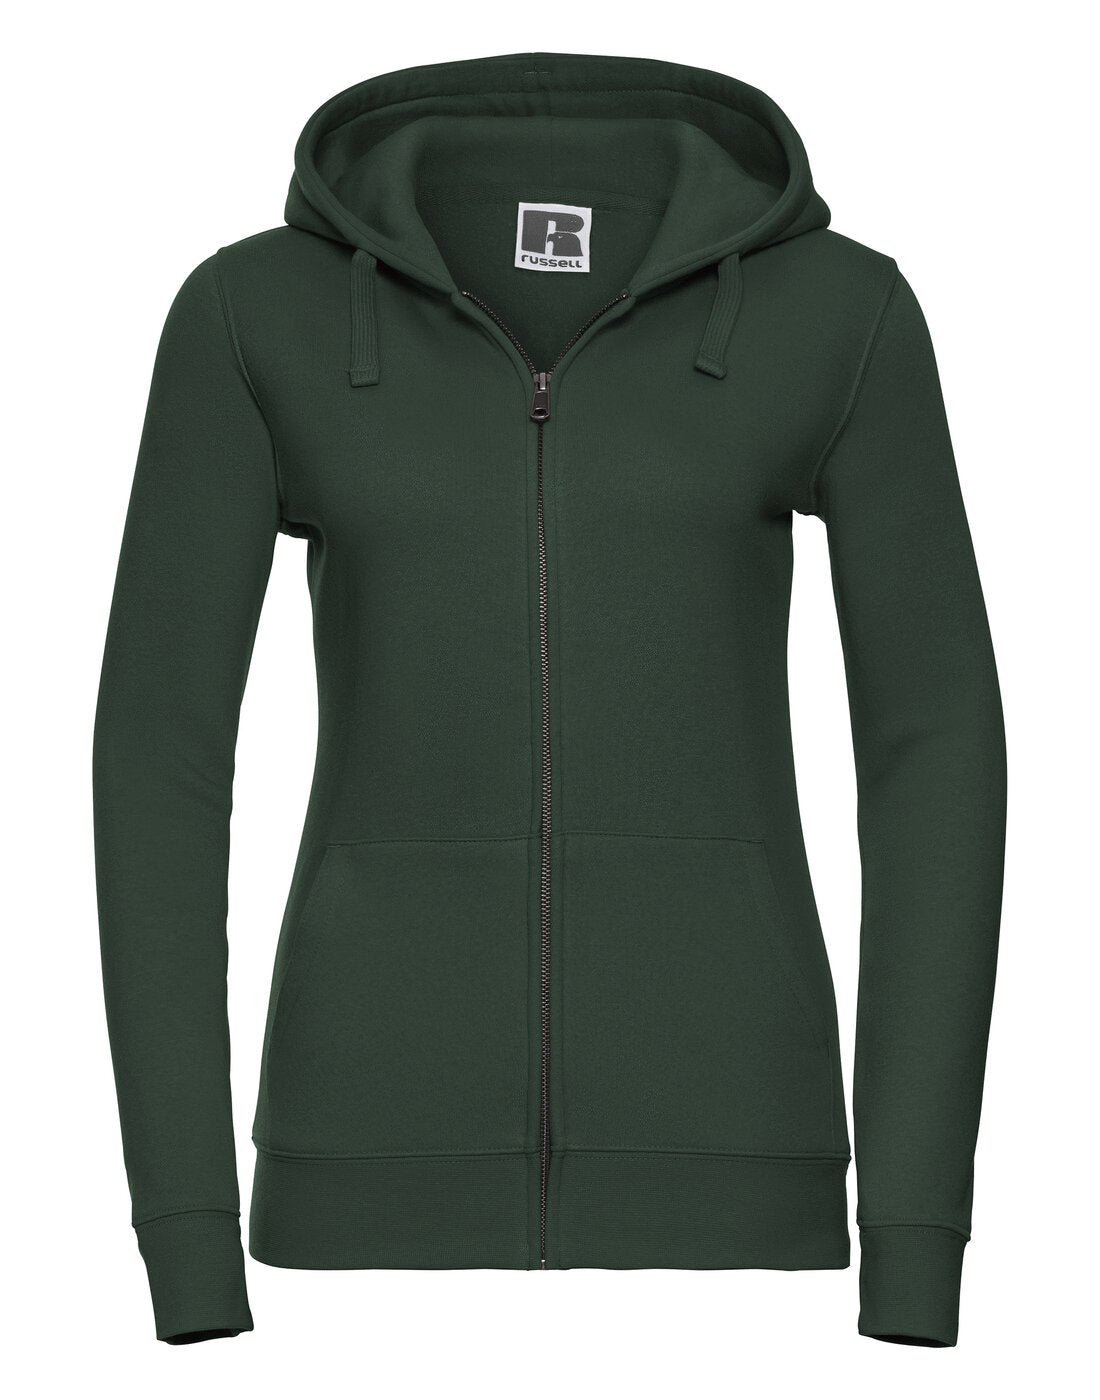 Russell Ladies Authentic Zipped Hood Bottle Green